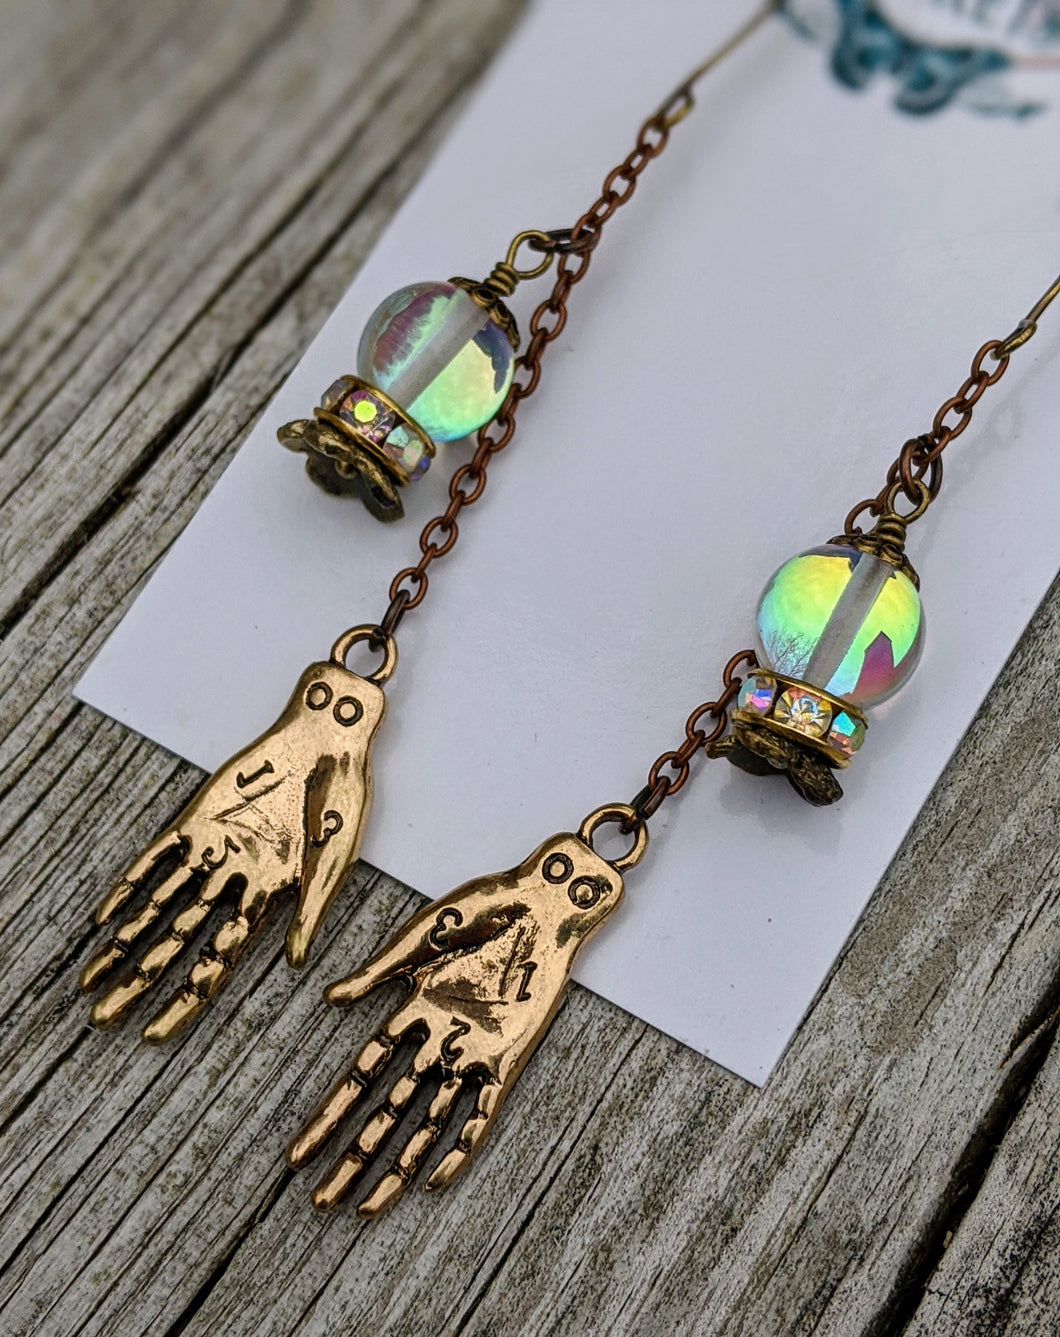 Palmistry and Fortune Teller Crystal Ball Earrings II - Minxes' Trinkets